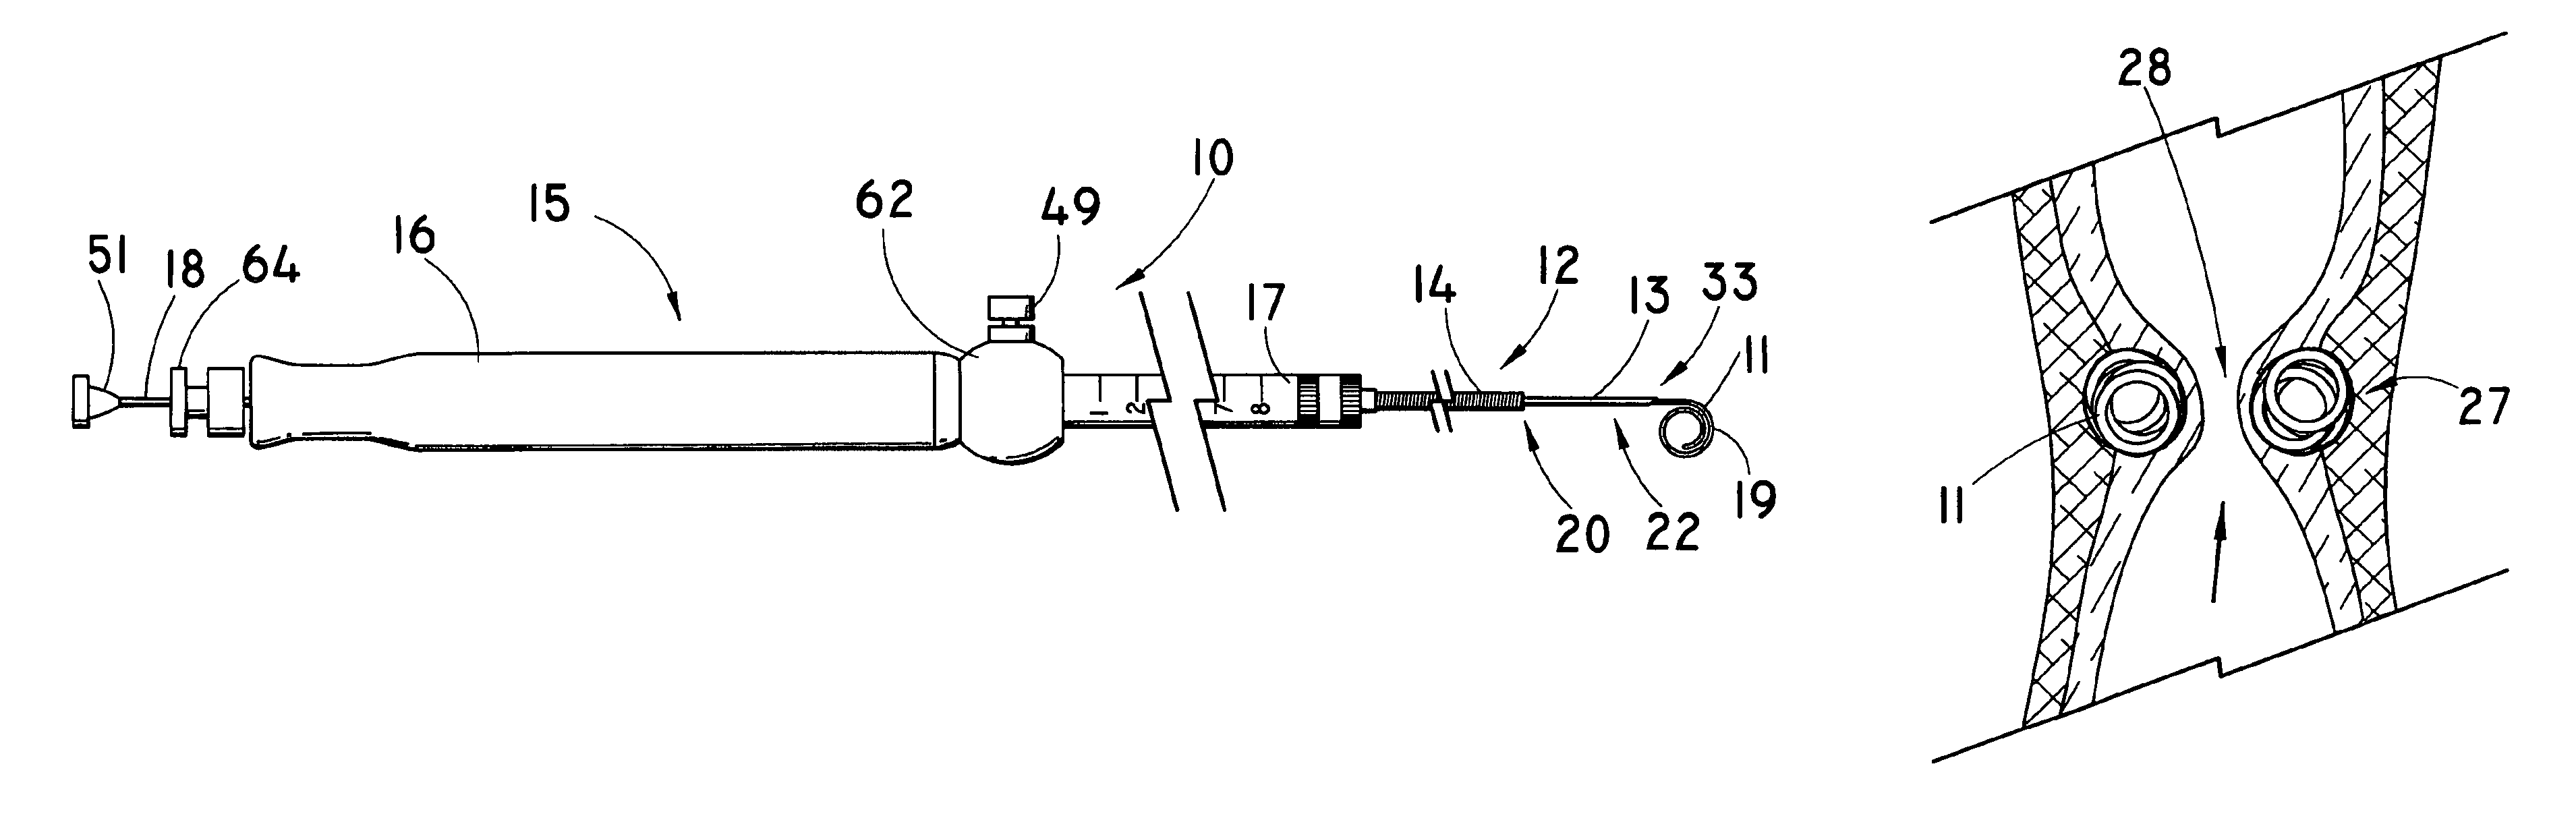 Method and apparatus for augmentation of a sphincter